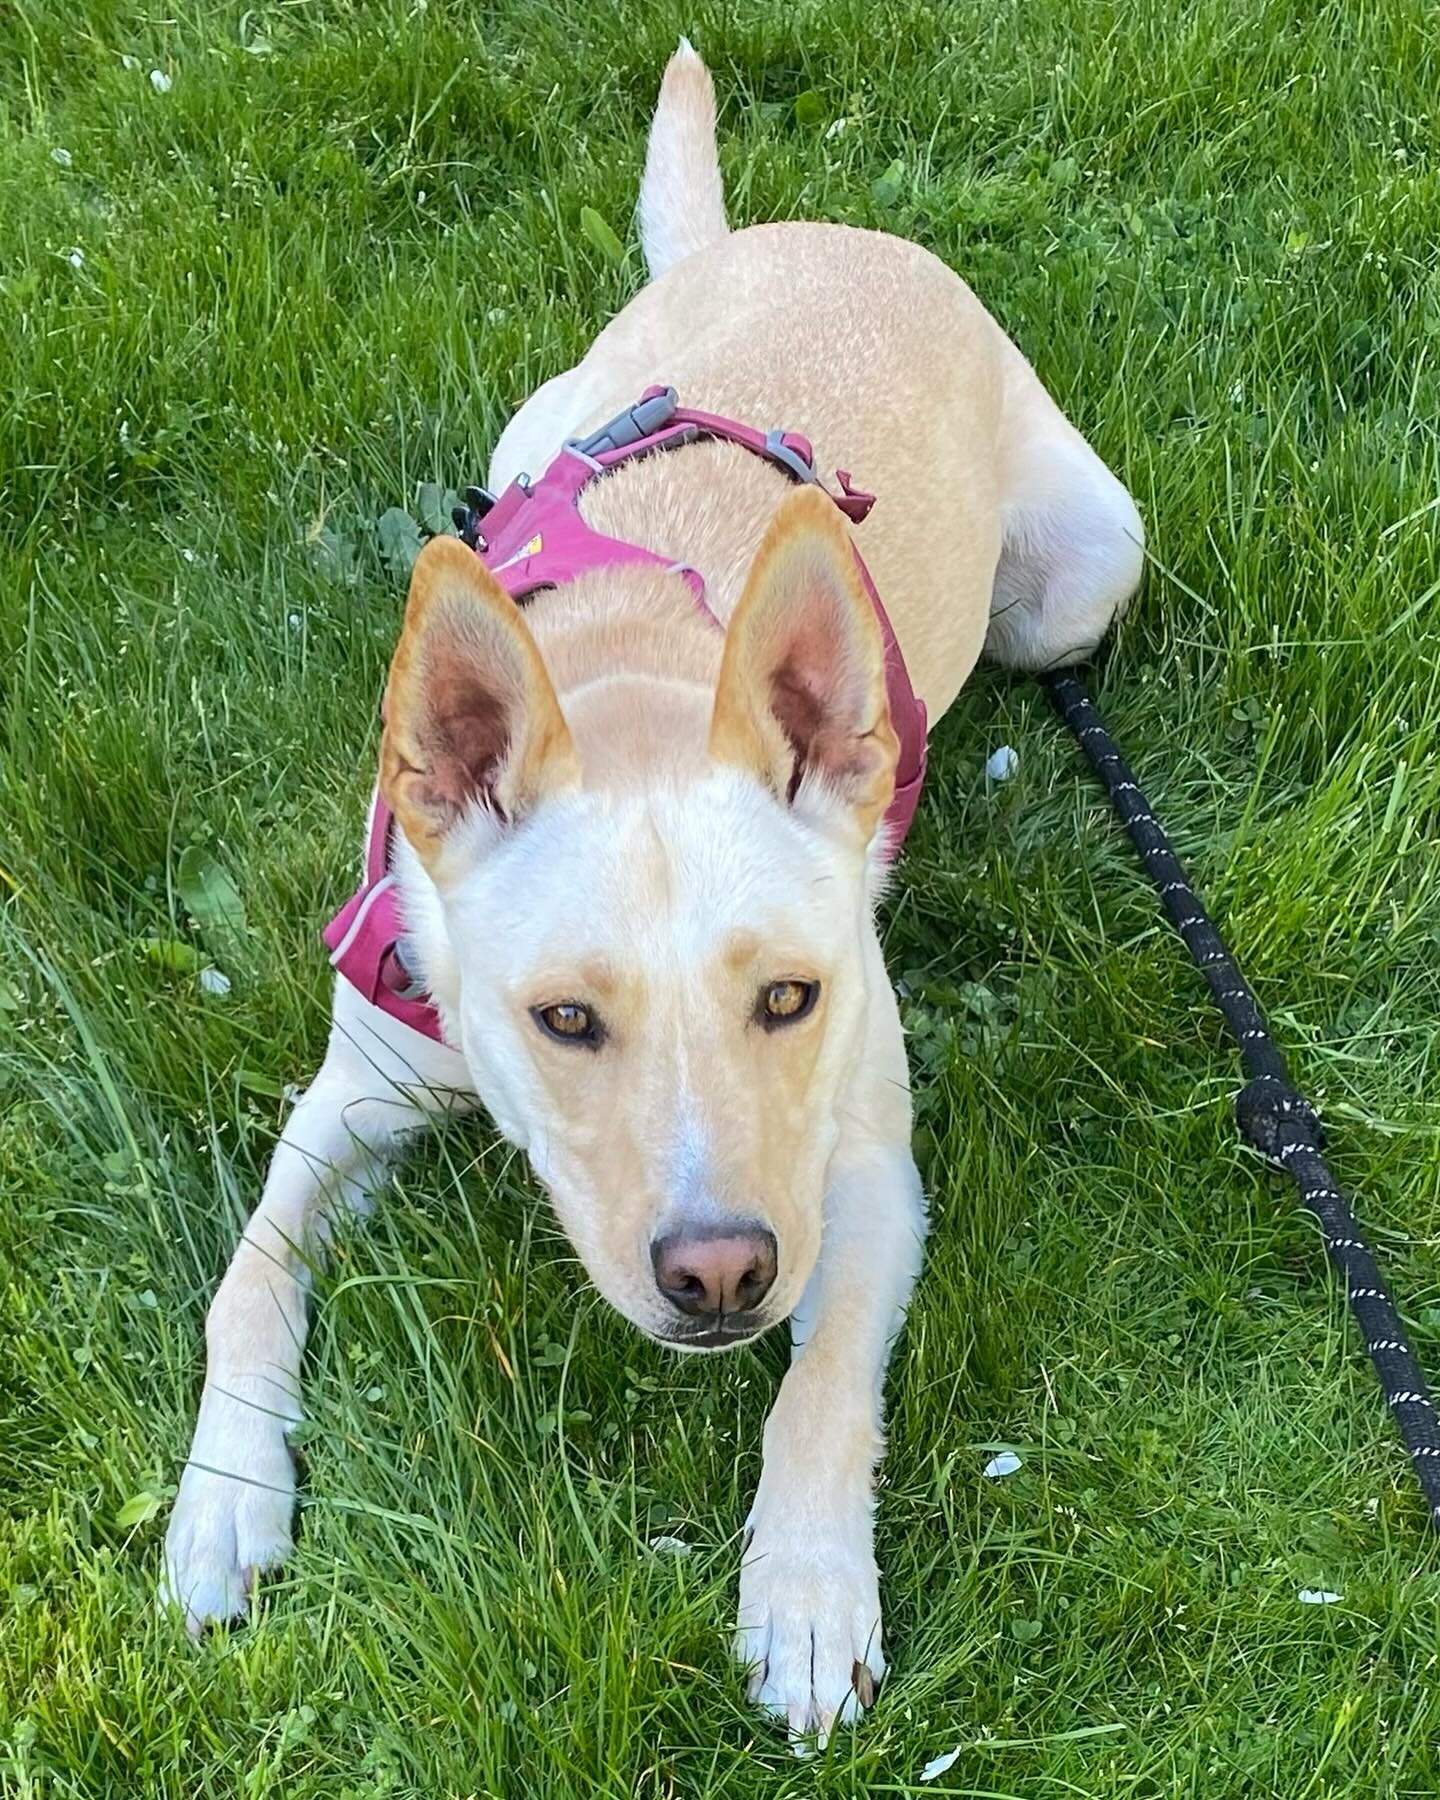 Say Hello to Luna! A 3 yr old Husky Pit mix who has general reactivity to dogs on leash and barking when passing the home. Educated owners on strategies to teach Luna how to manage her arousal, demand behavior by implementing ways to work harder and 